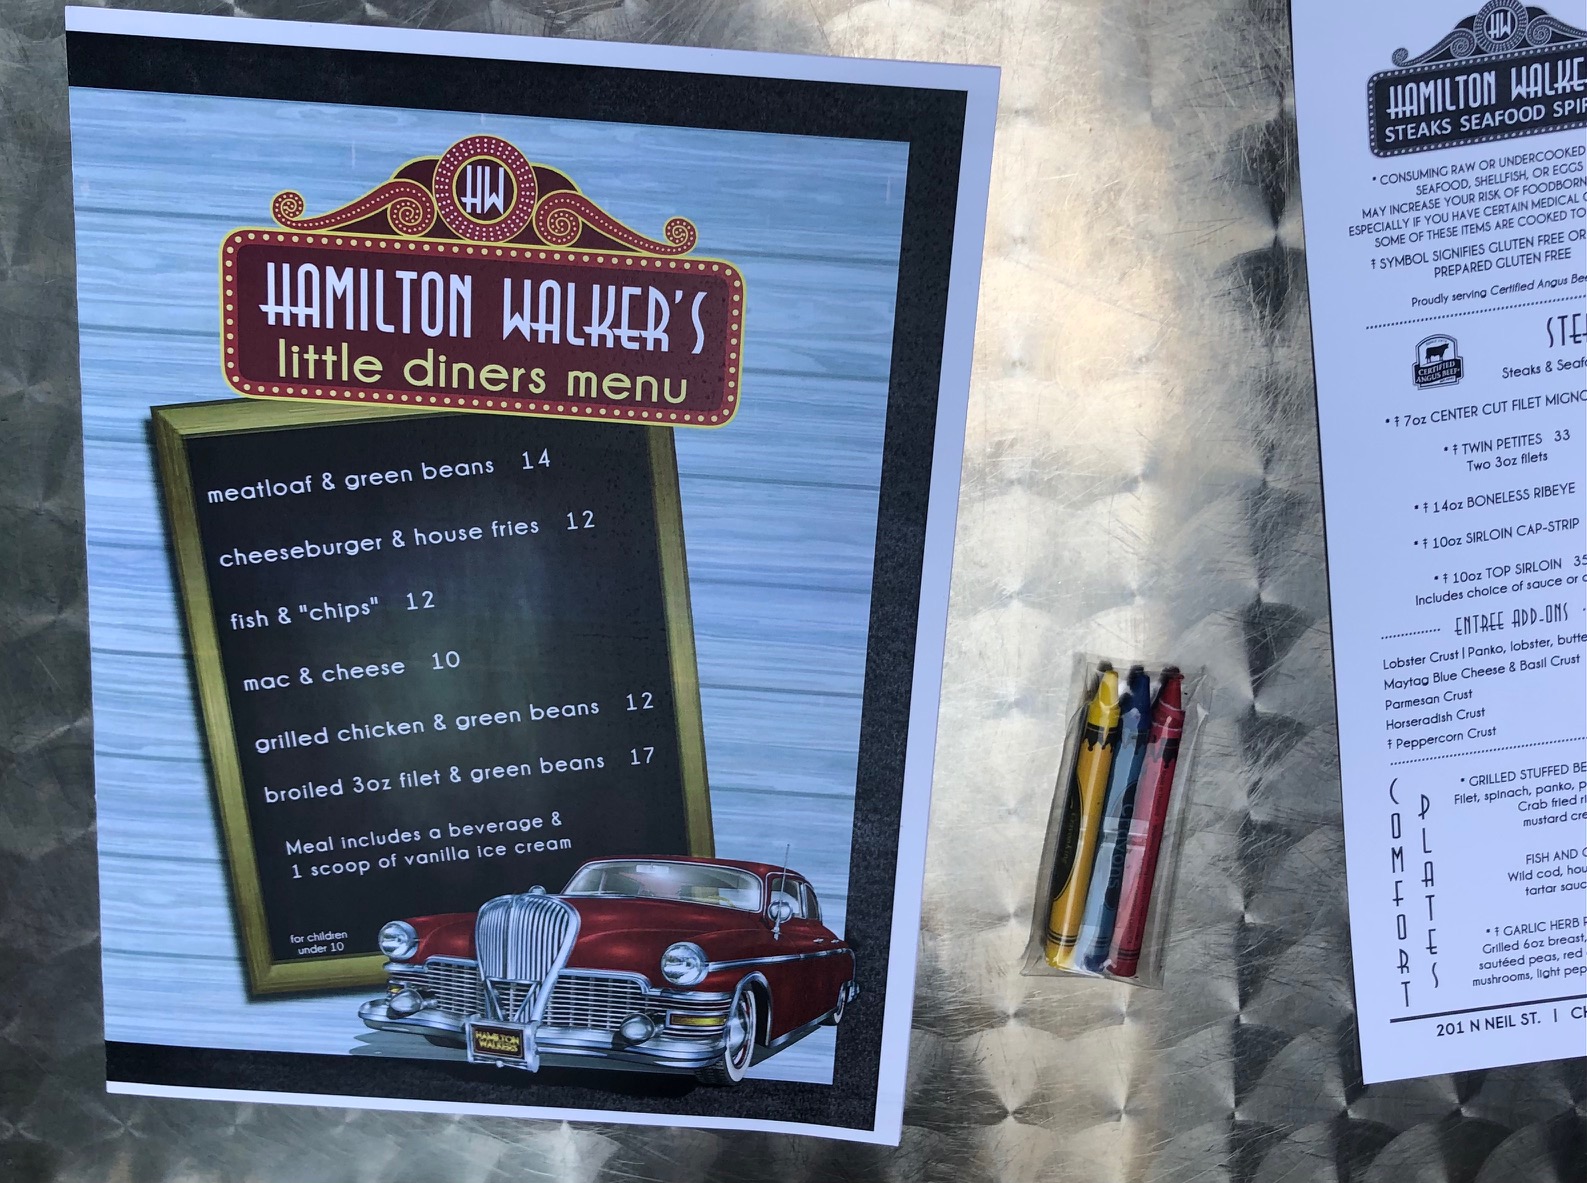 On a silver table at Hamilton Walker's in Champaign, Illinois, there is a kids' menu with a plastic wrapped set of crayons. Photo by Alyssa Buckley.